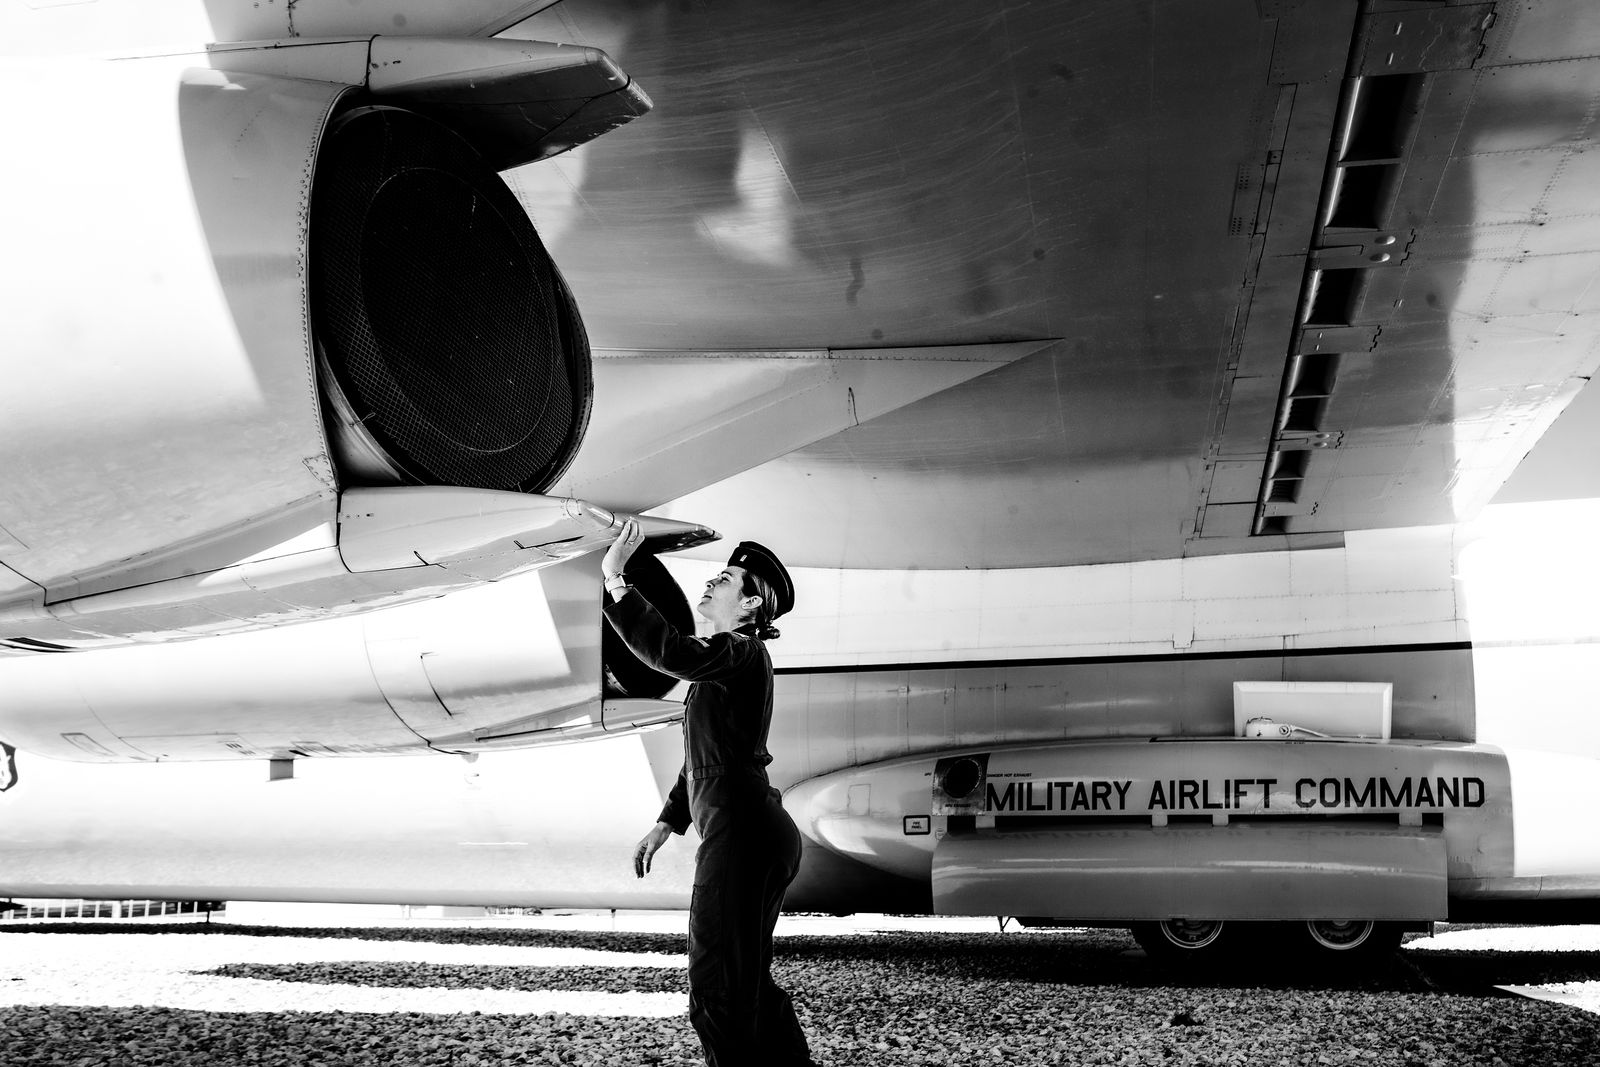 © Katerina Christina - Part of a rigorous, pre-flight inspection that Lily conducts every time she flies.